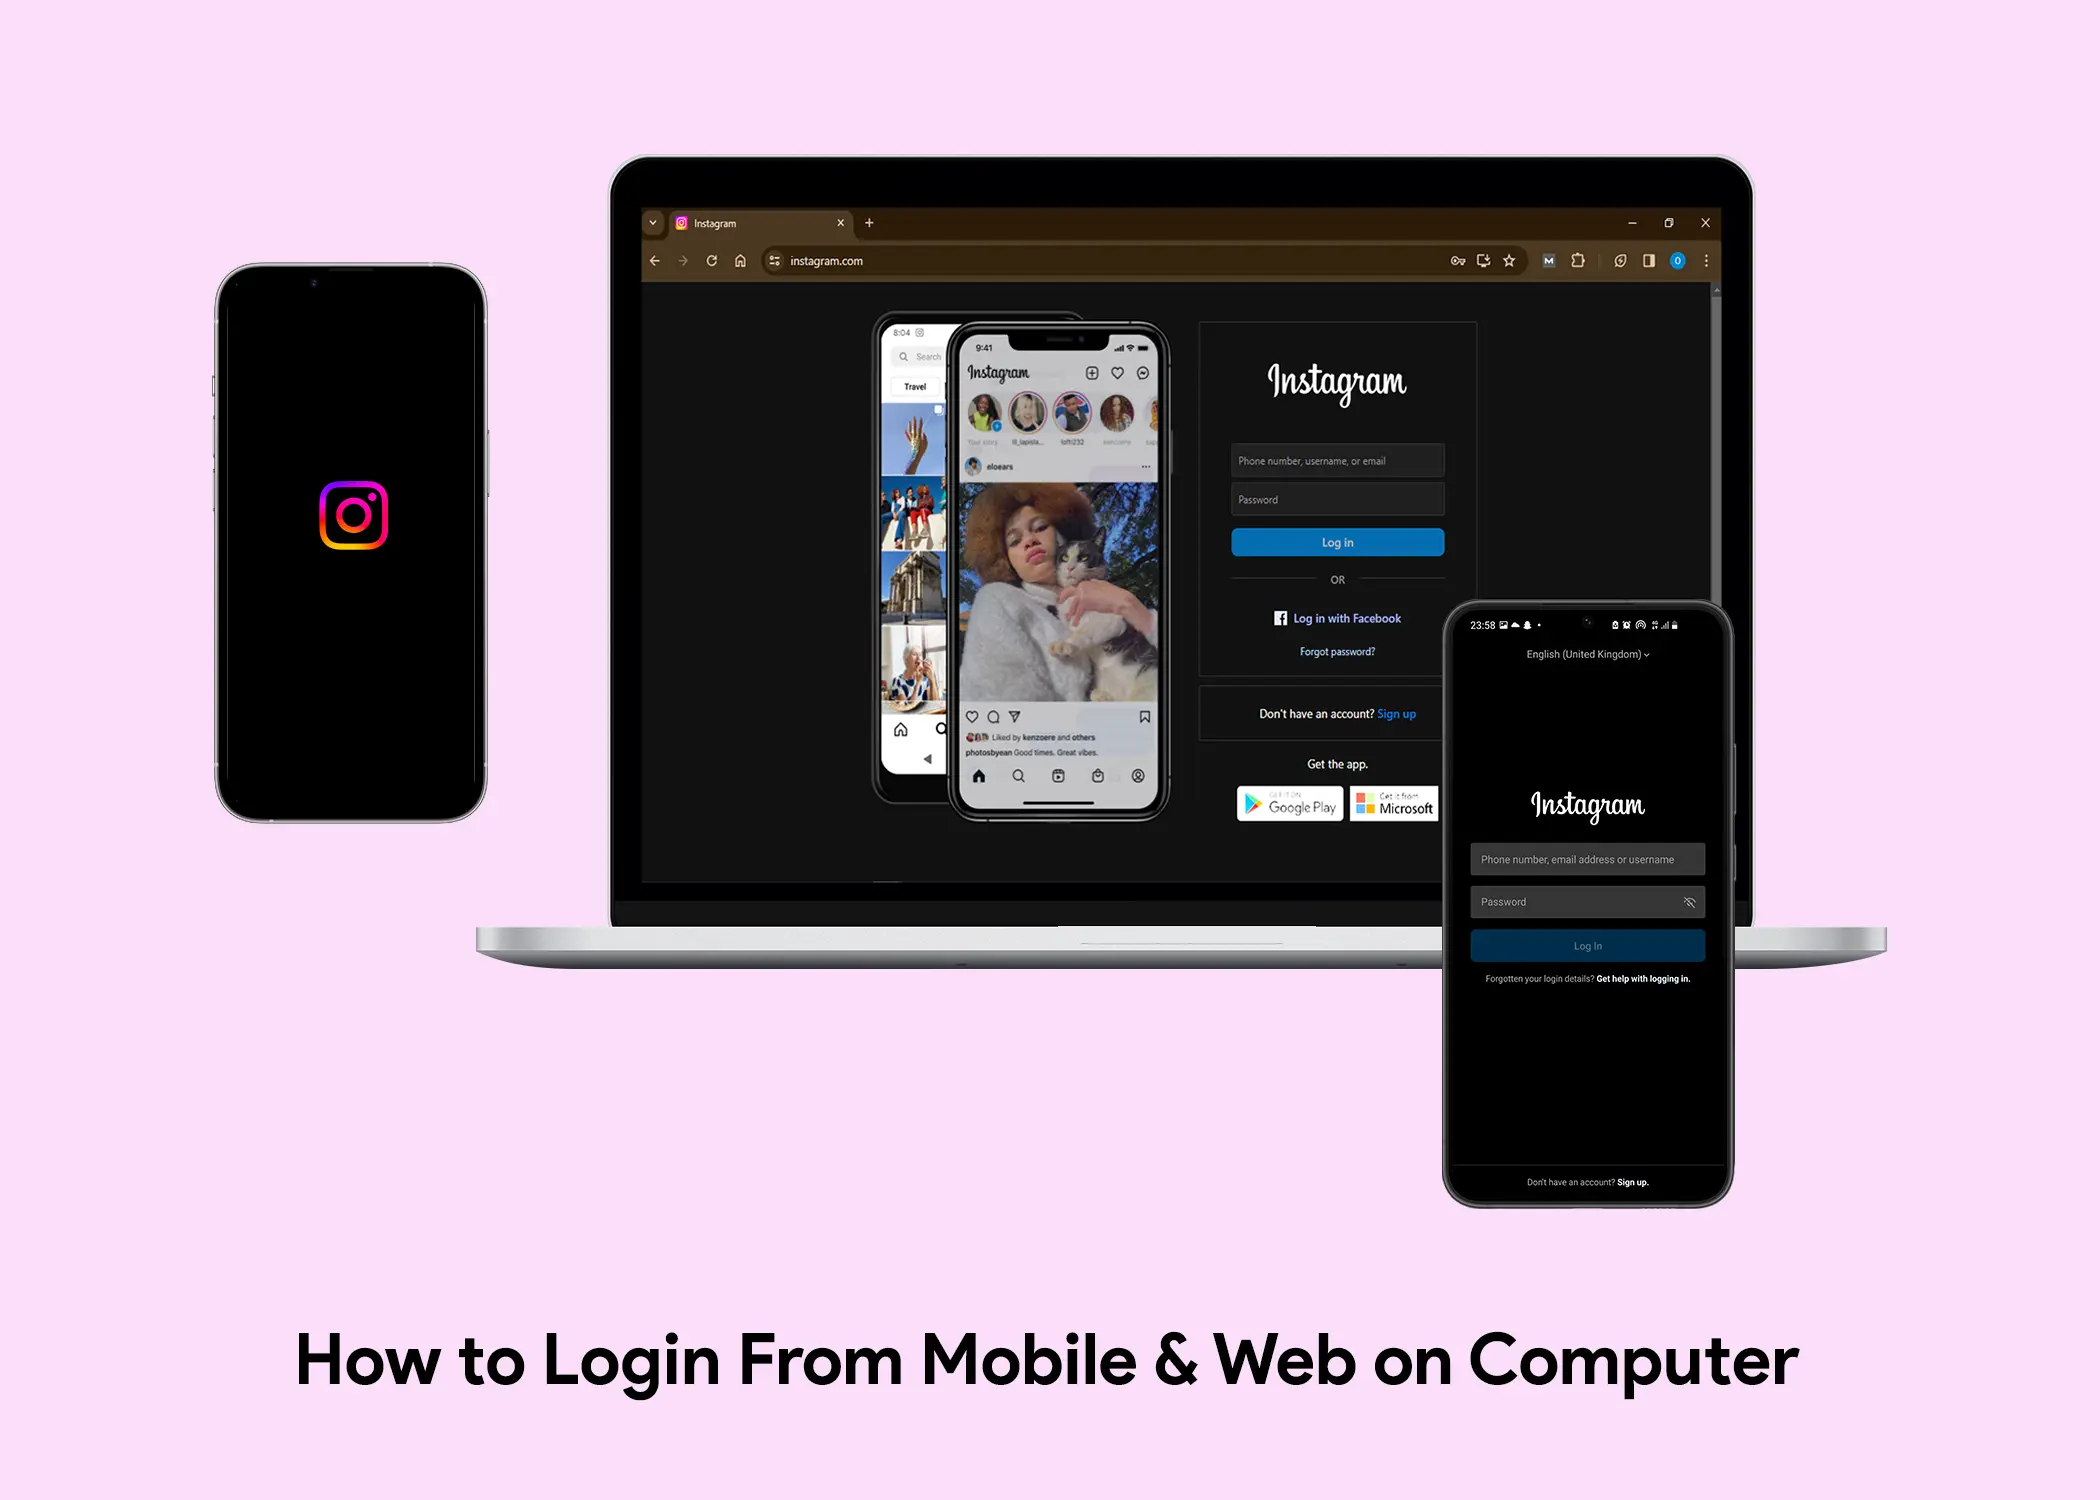 Instagram Sign In: How to Login From Mobile & Web on Computer